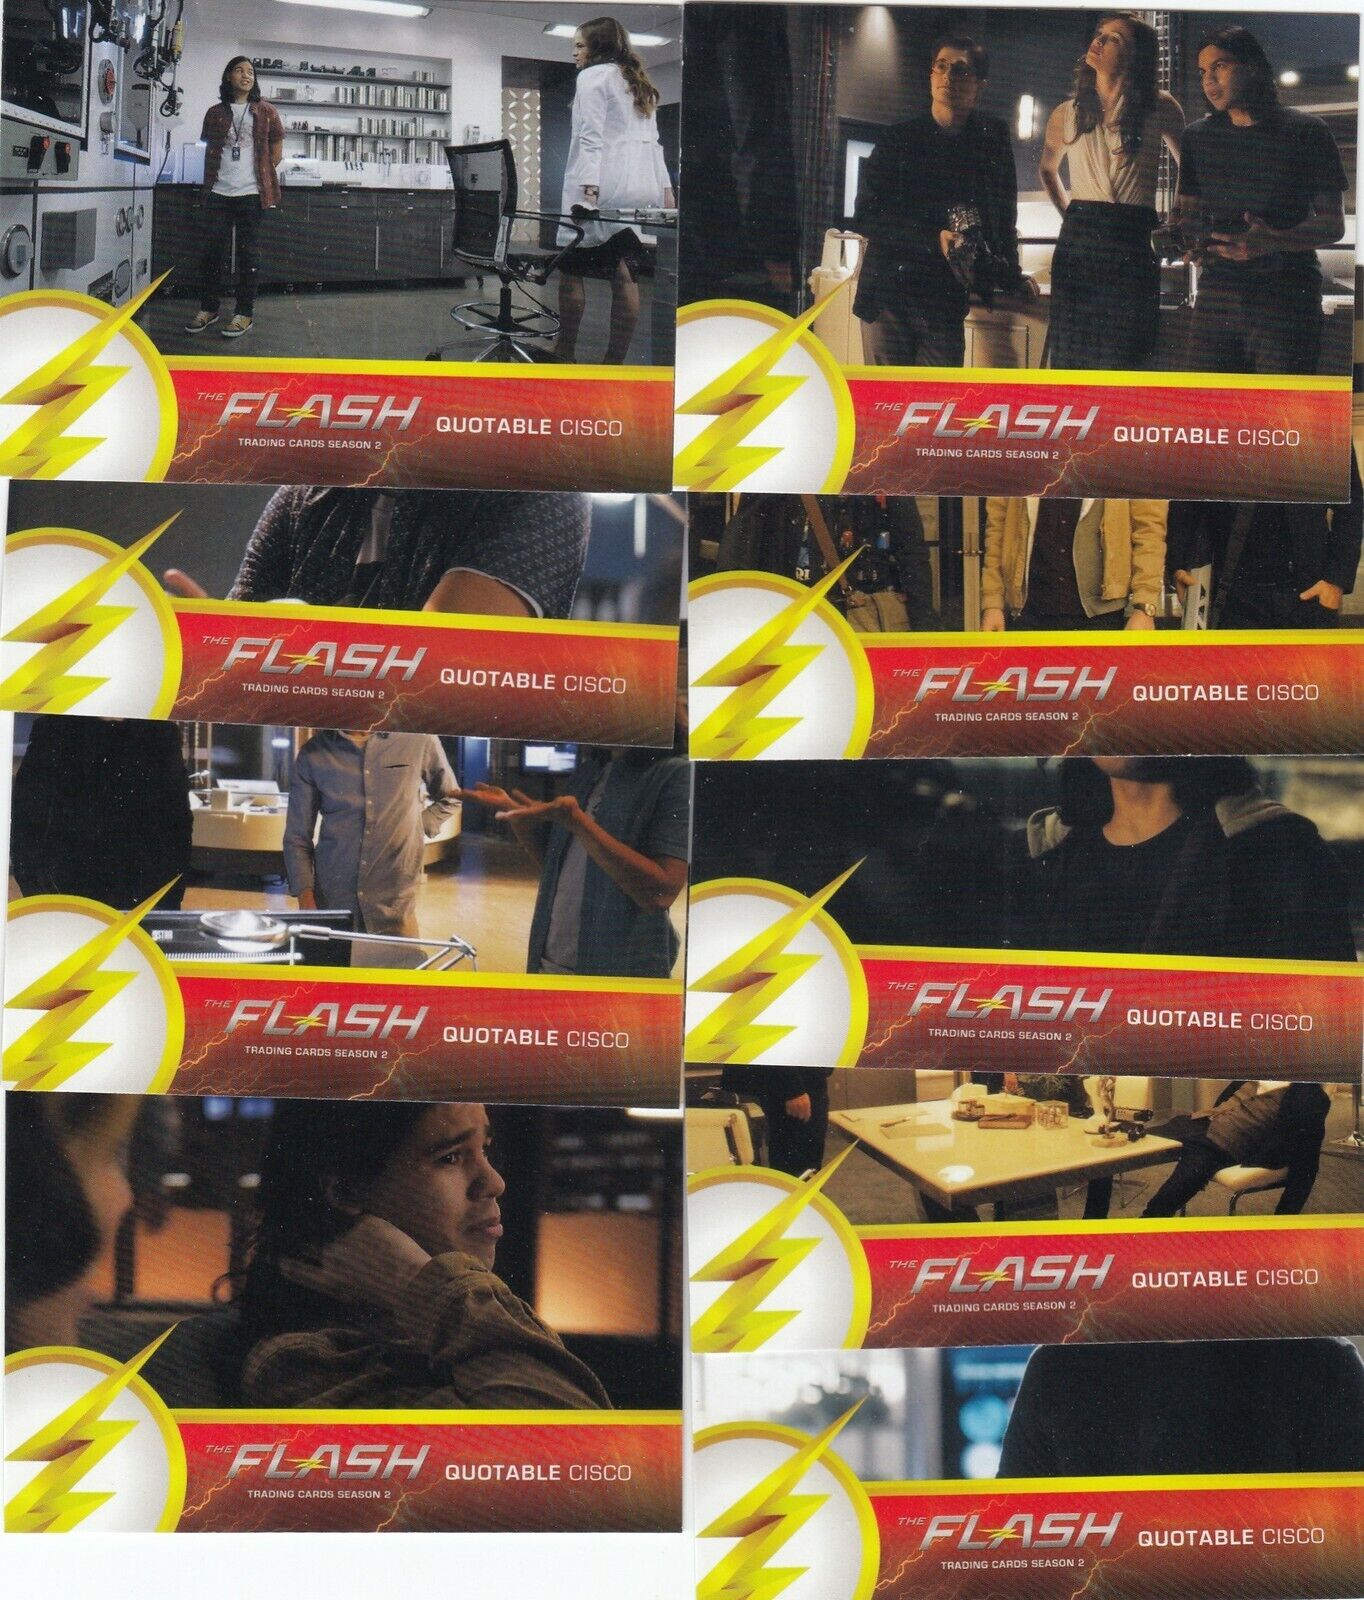 2017 The Flash Season 2 QUOTABLES 9 Card Complete Insert Set